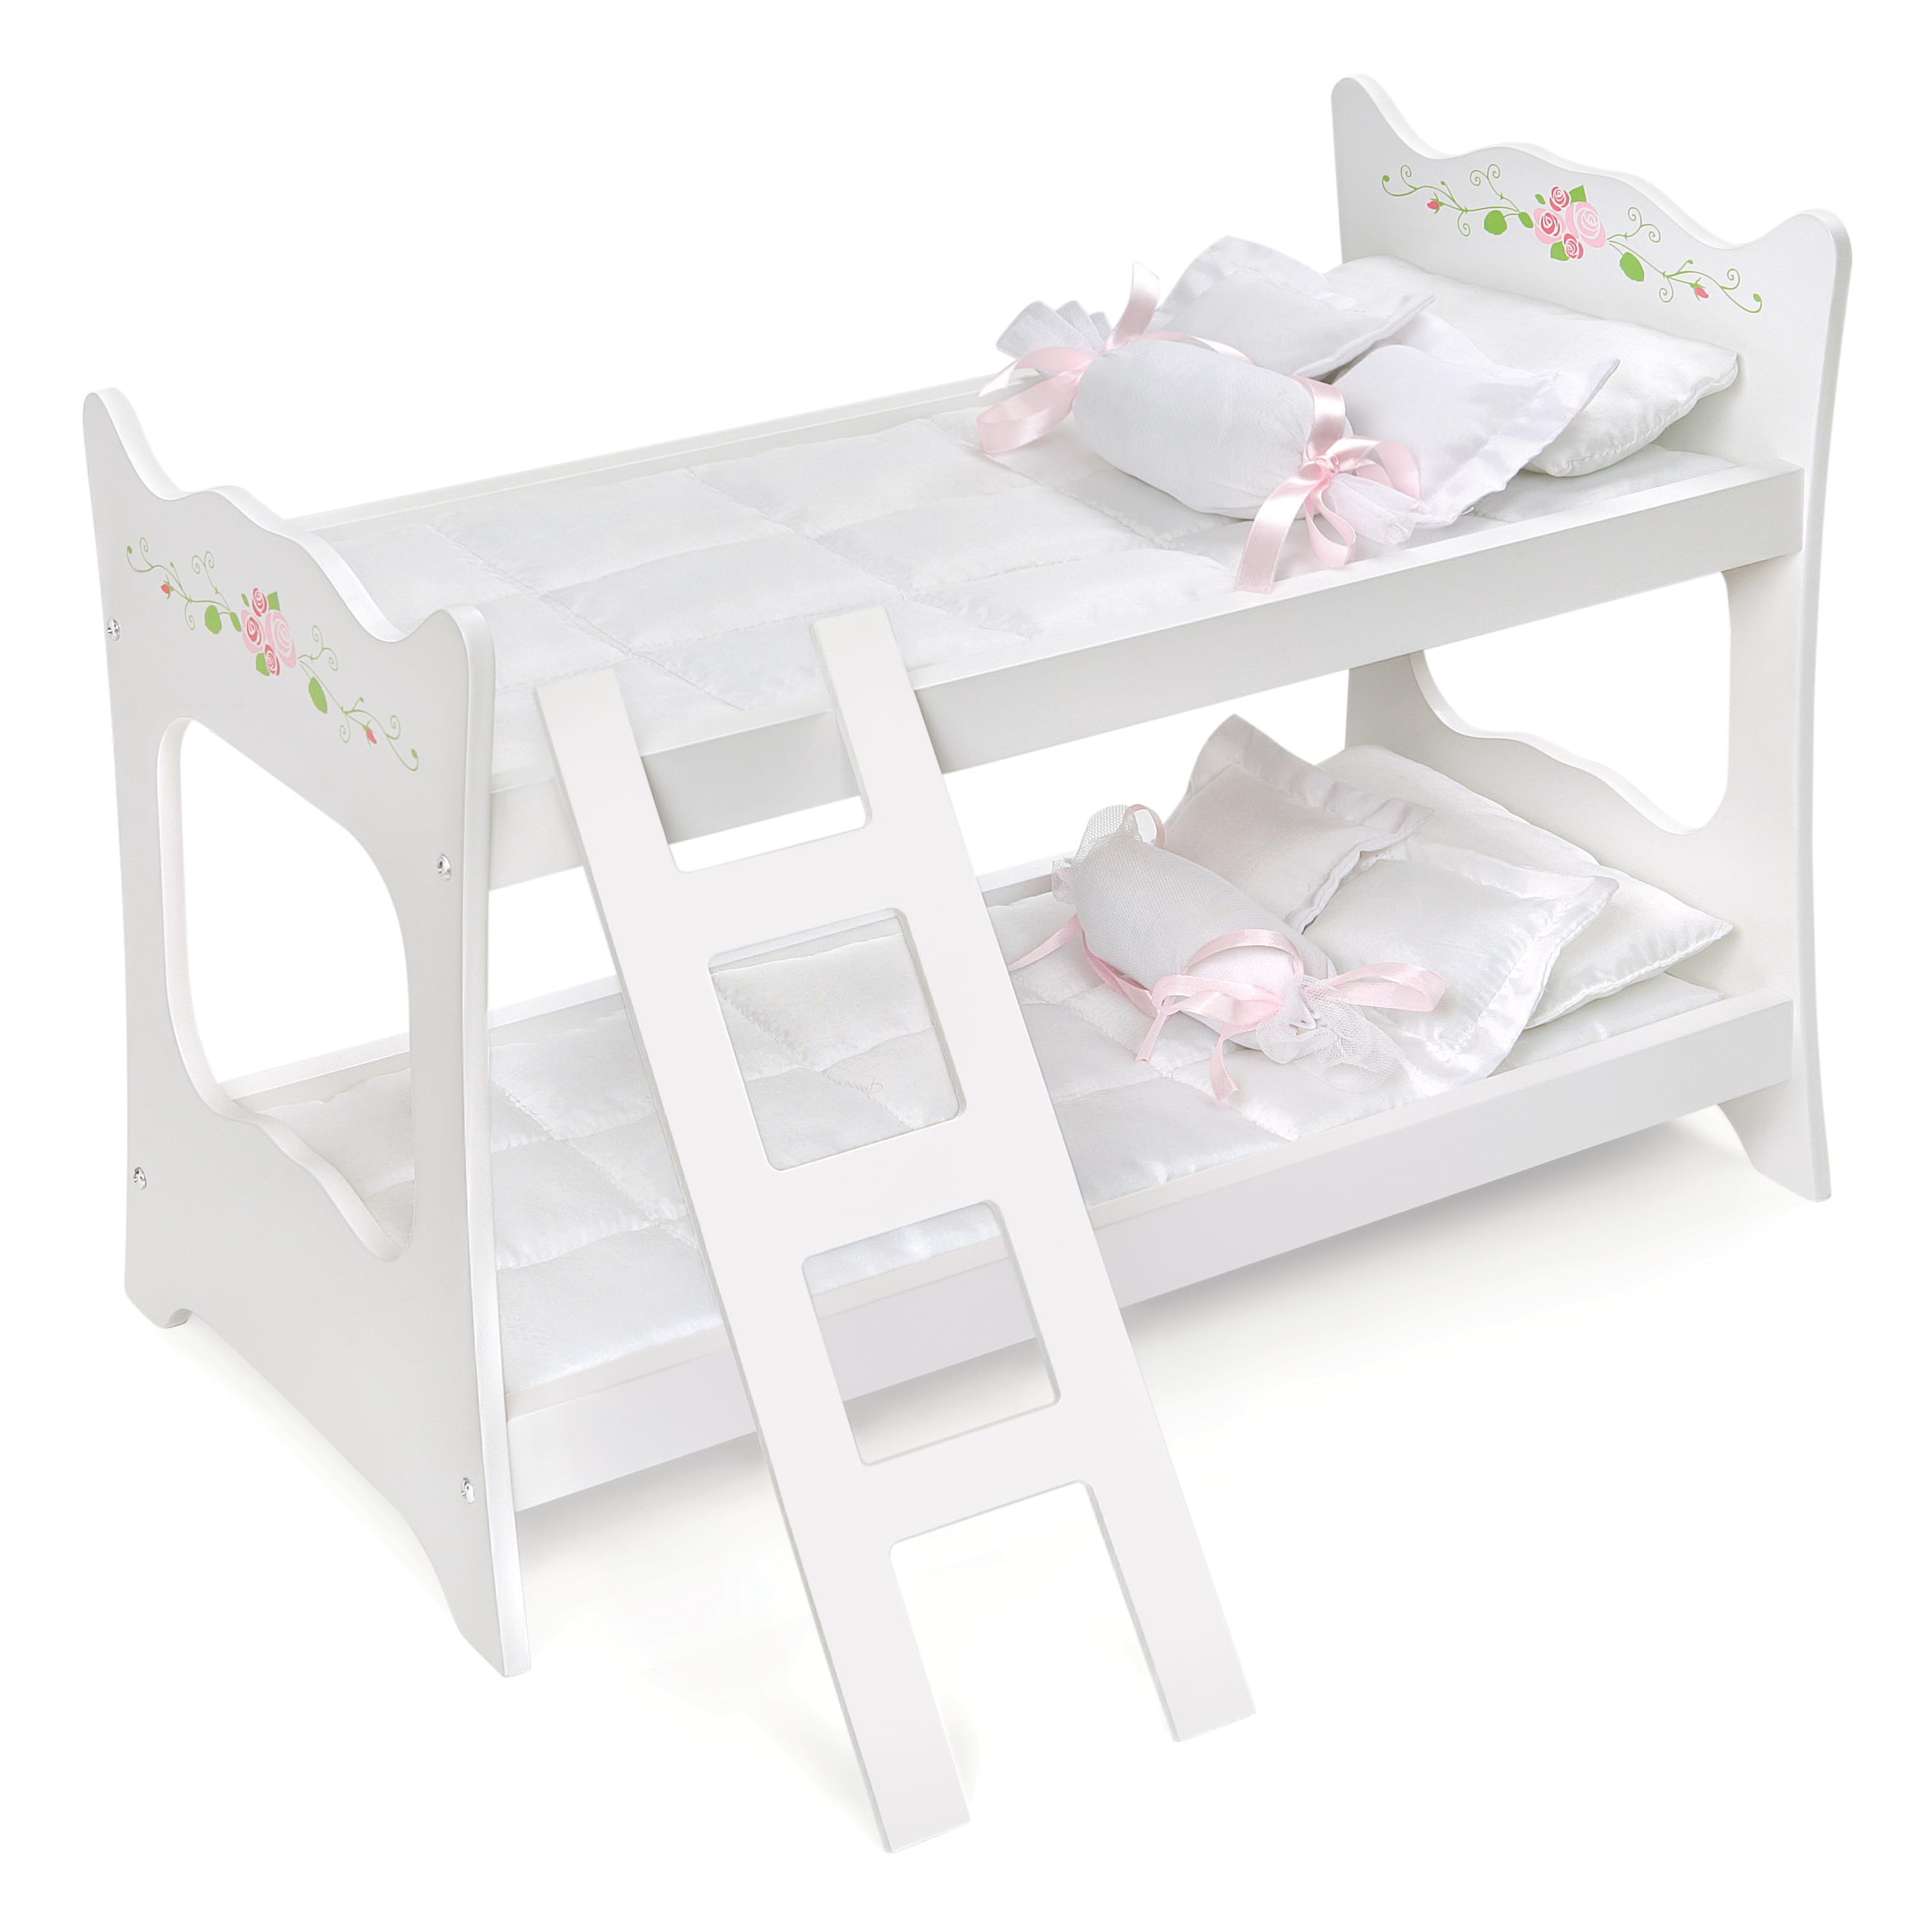 Girls Kids White Rose 1-2-3 Convertible Doll Bunk Bed w/ Storage Baskets Toy NEW 